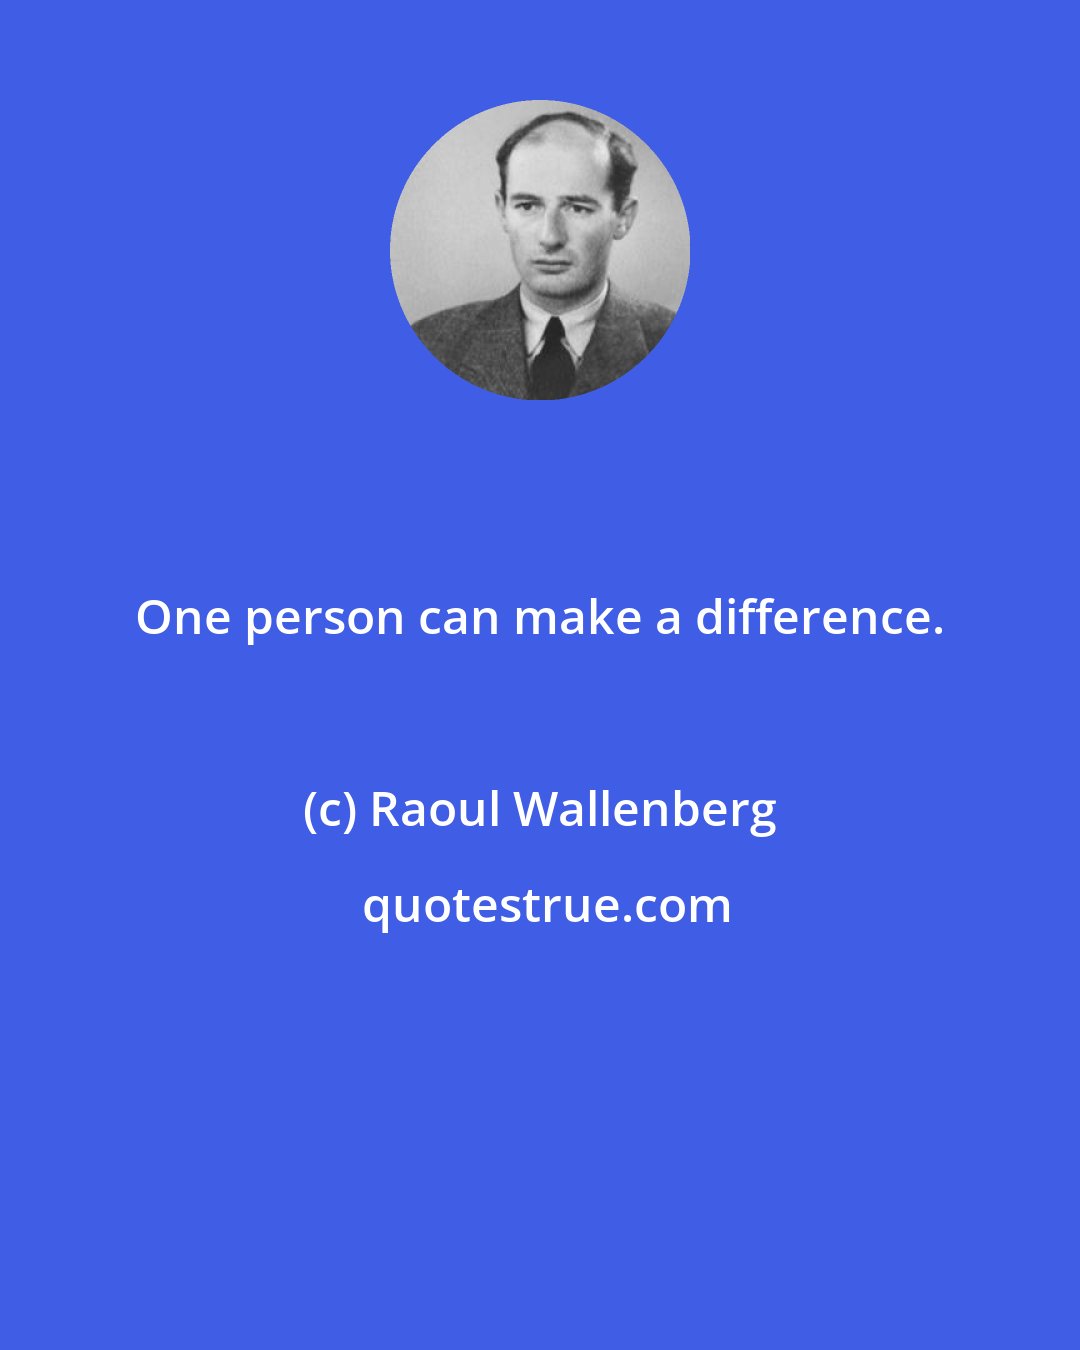 Raoul Wallenberg: One person can make a difference.